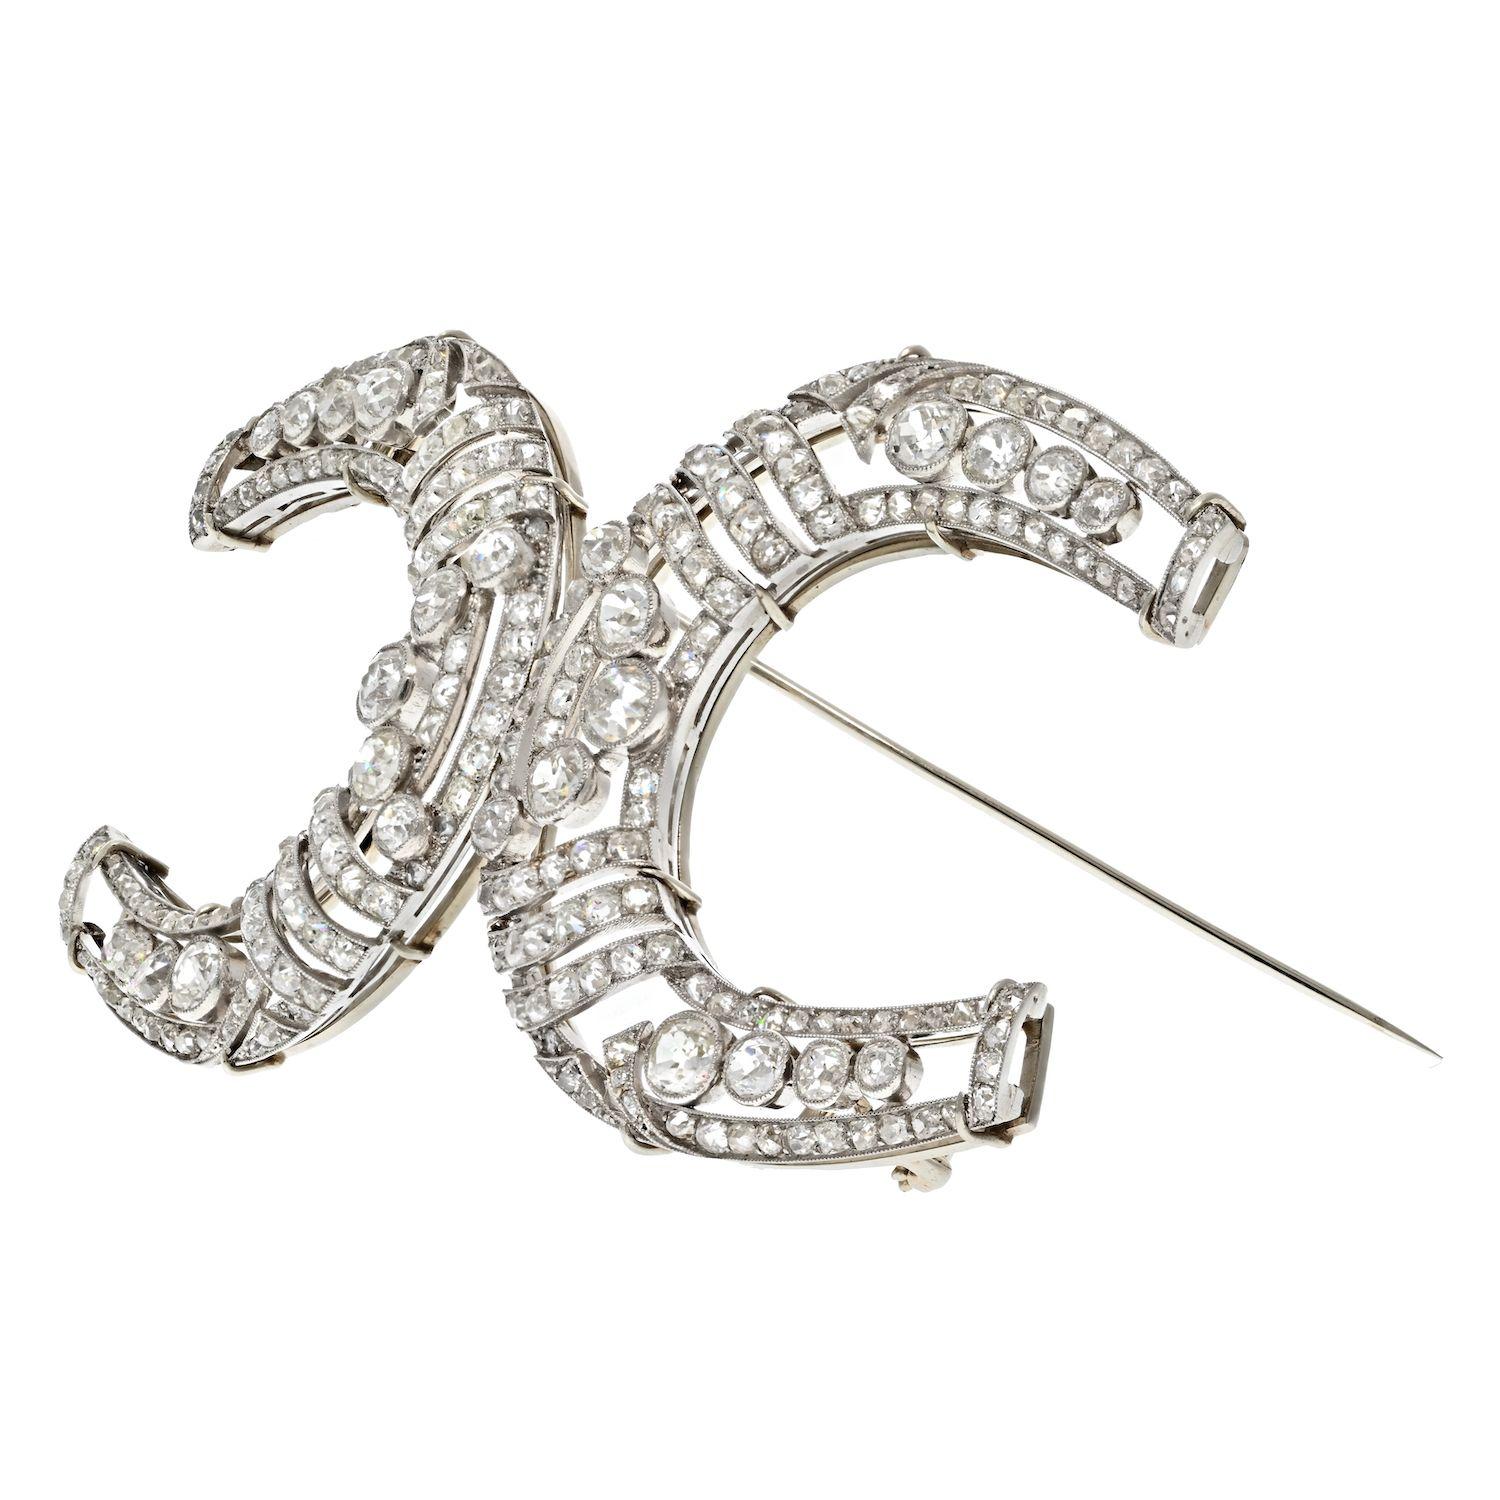 Platinum Double Horse Shoe Vintage Brooch. Mounted with 23 carats of antique diamonds over filigree frame. The brooch has a beautiful open layout made in a shape of a double horse shoe connected in the middle. The diamonds are of a nice light warm